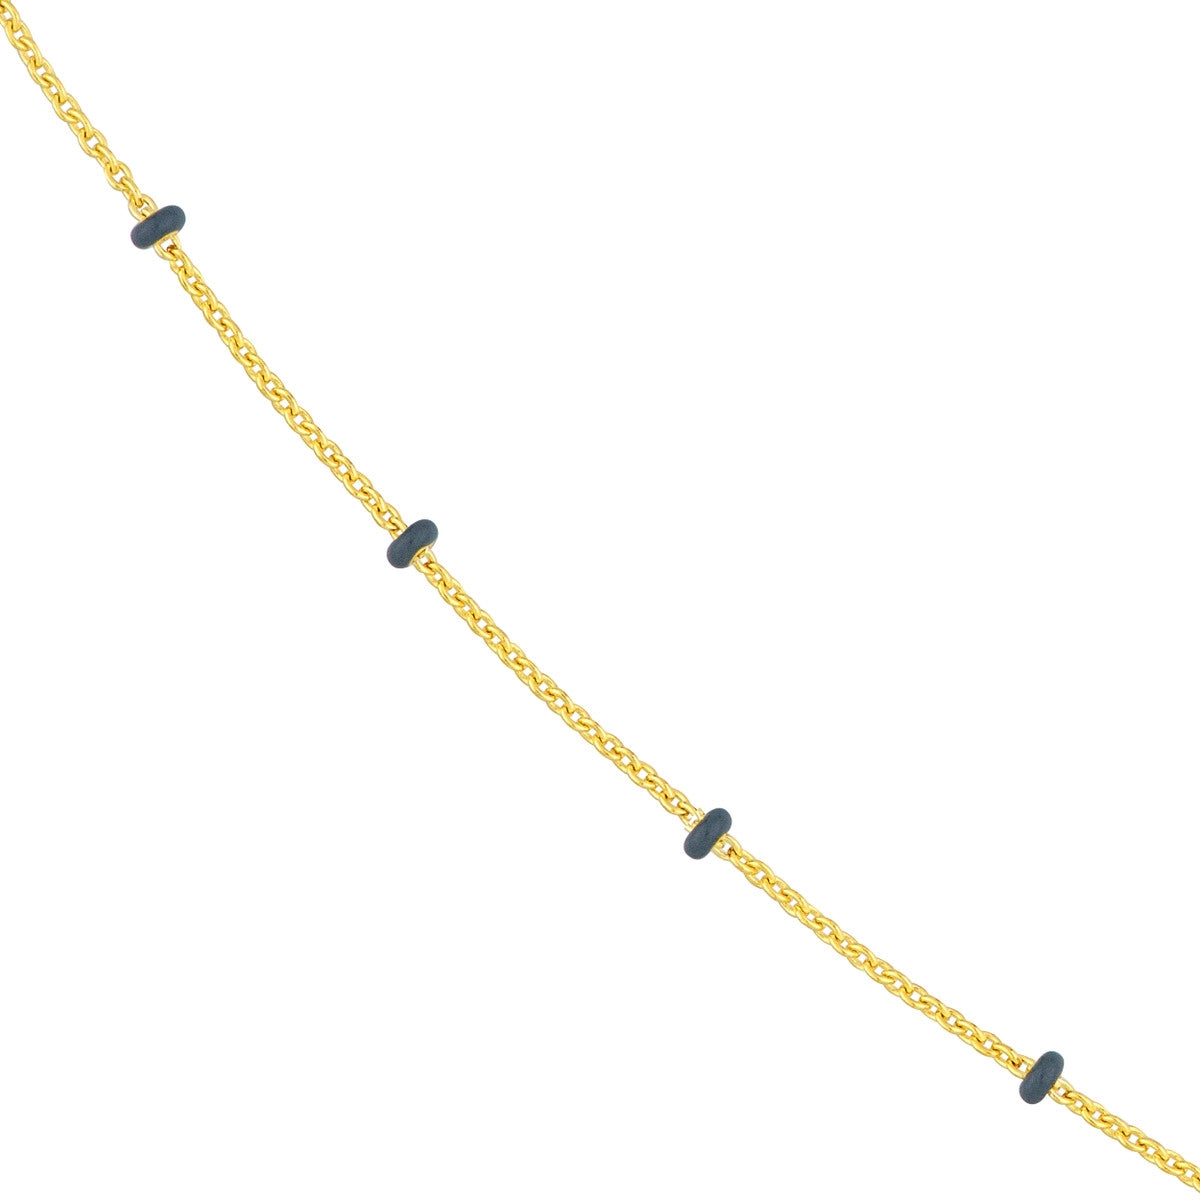 14K GOLD ROLO CHAIN WITH GRAY ENAMEL BEADS